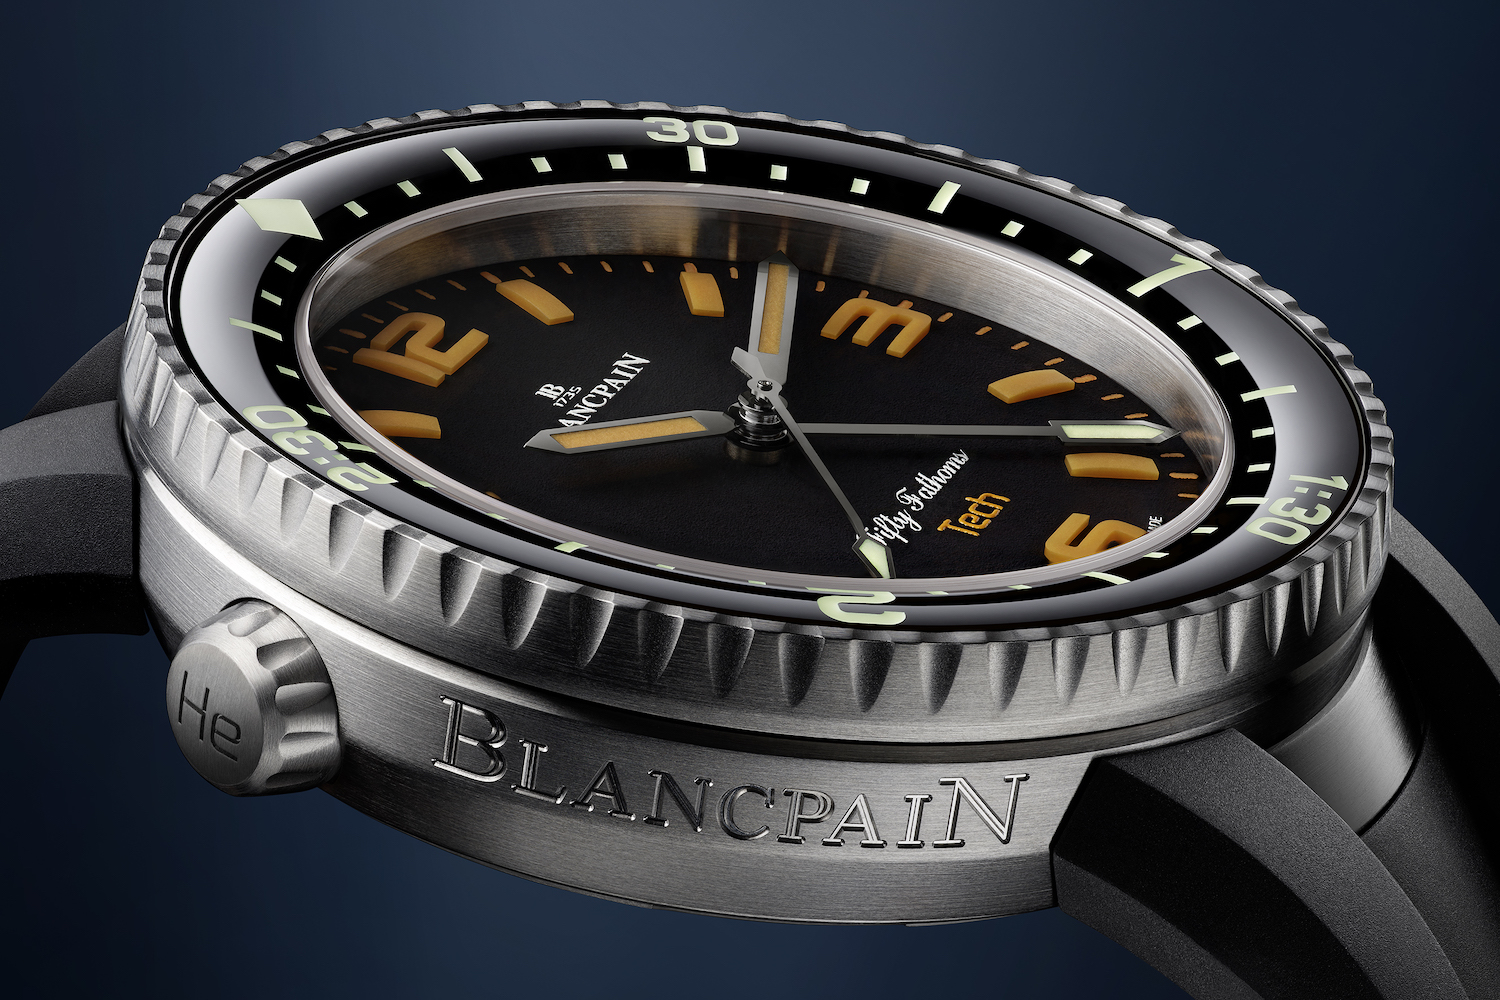 Blancpain Have Completely Revolutionised The Dive Watch With Their Latest Creation